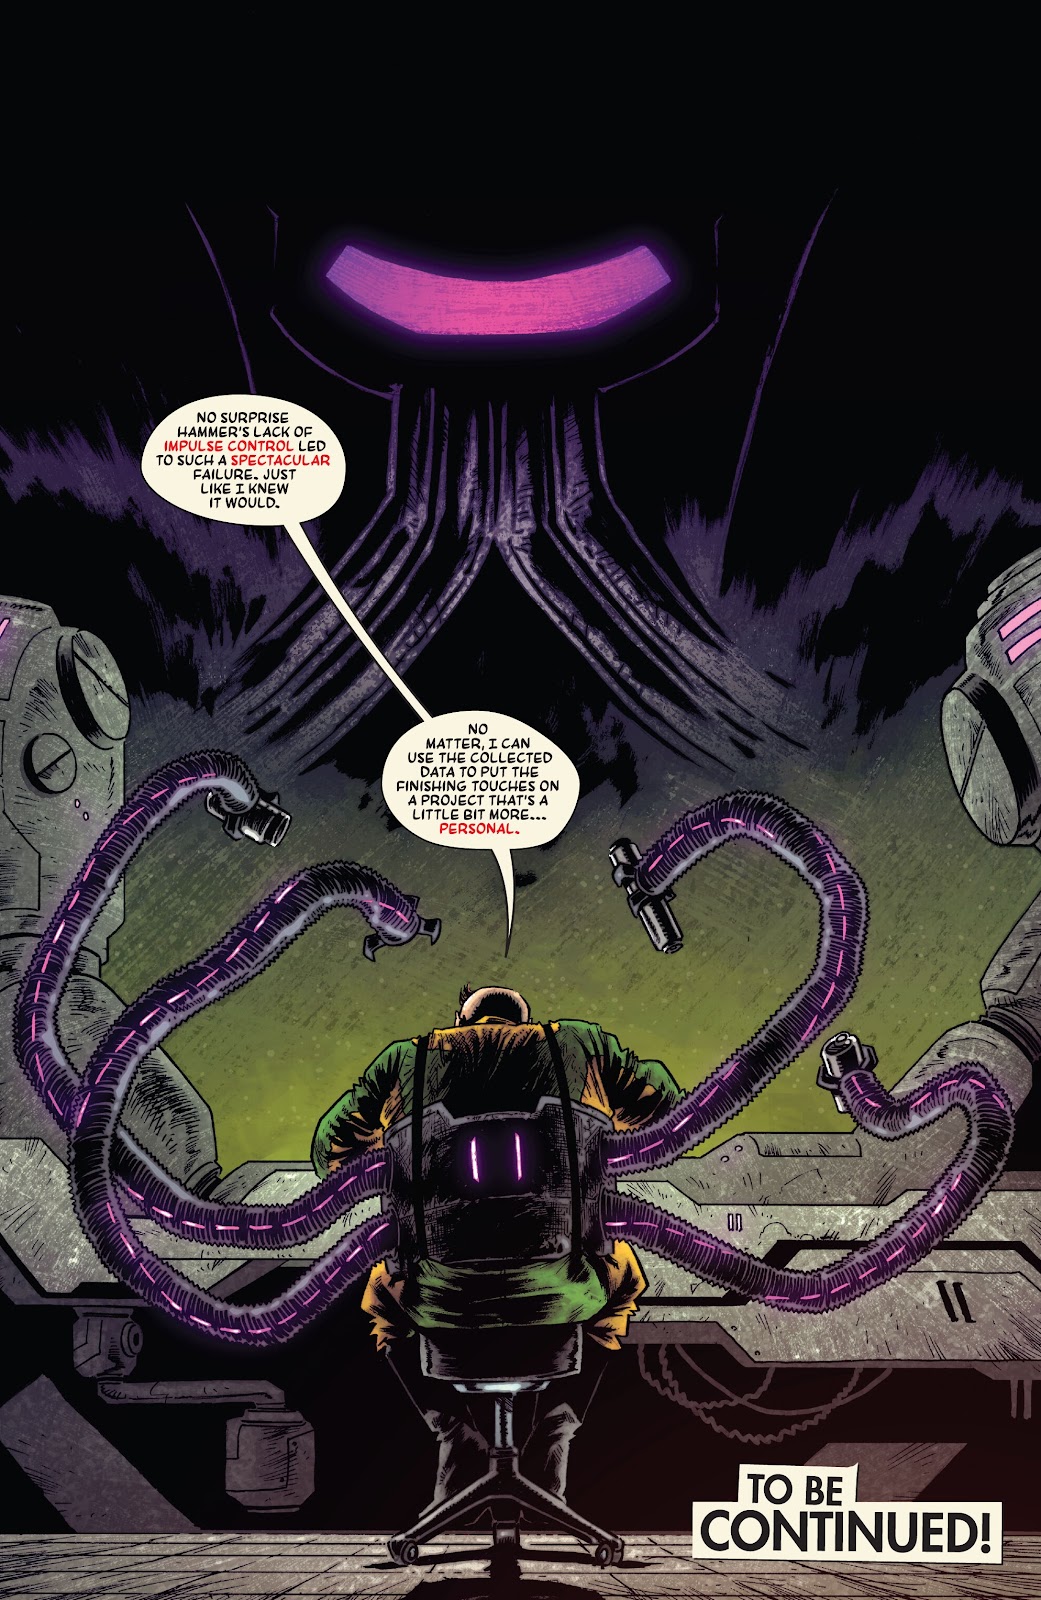 Spider-Punk: Arms Race issue 1 - Page 25